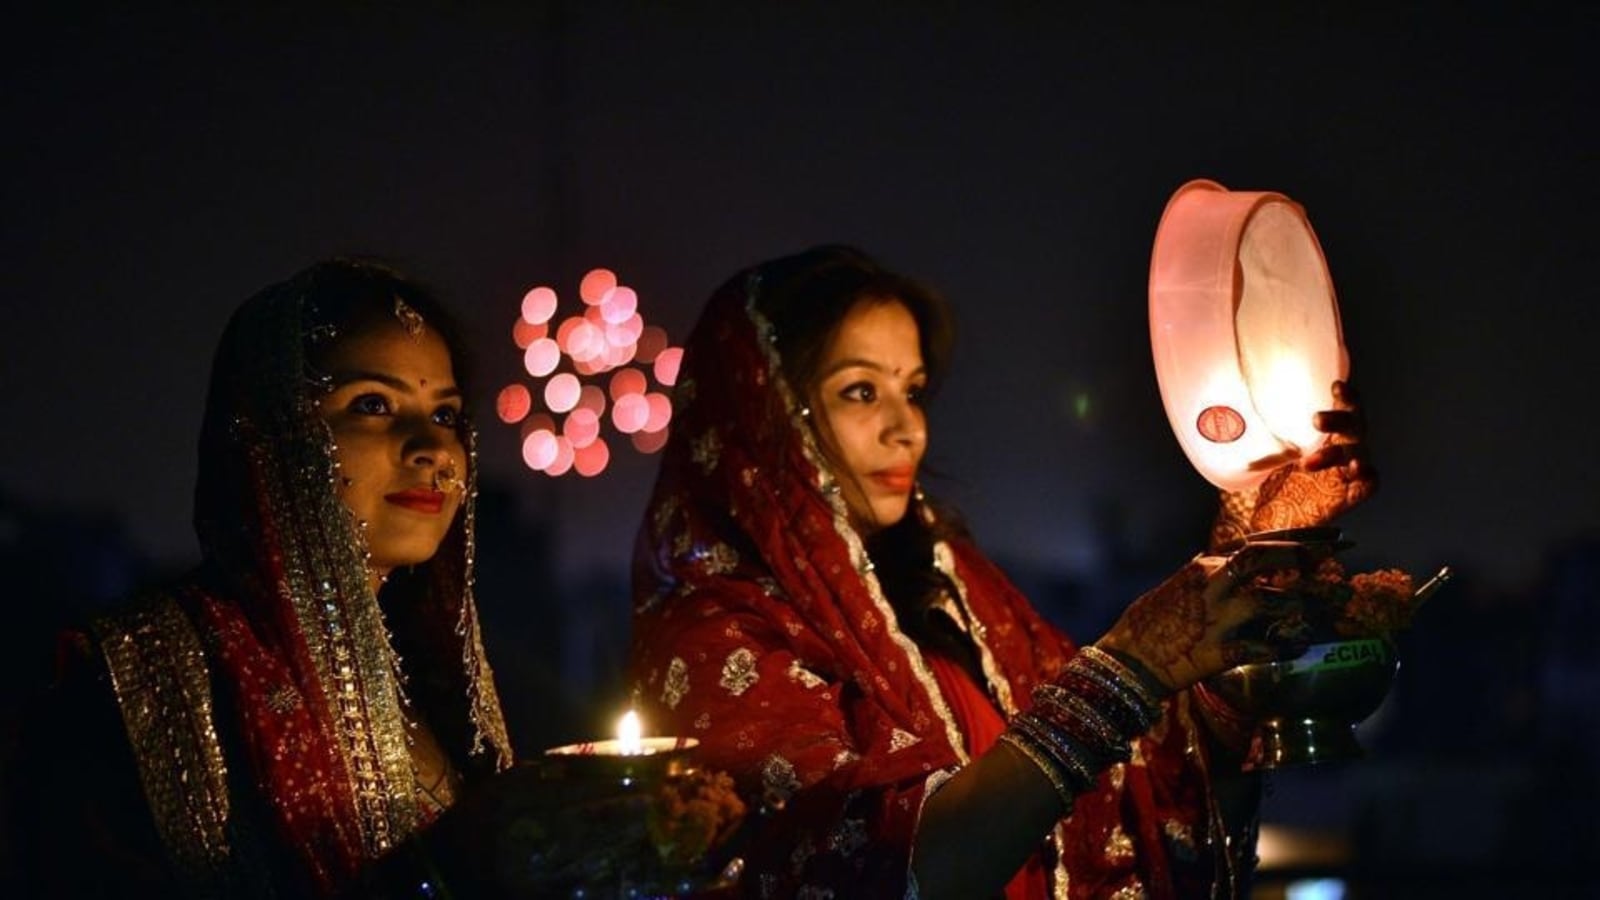 Karwa Chauth Date 2022 Is Karwa Chauth on October 13 or 14? Know all